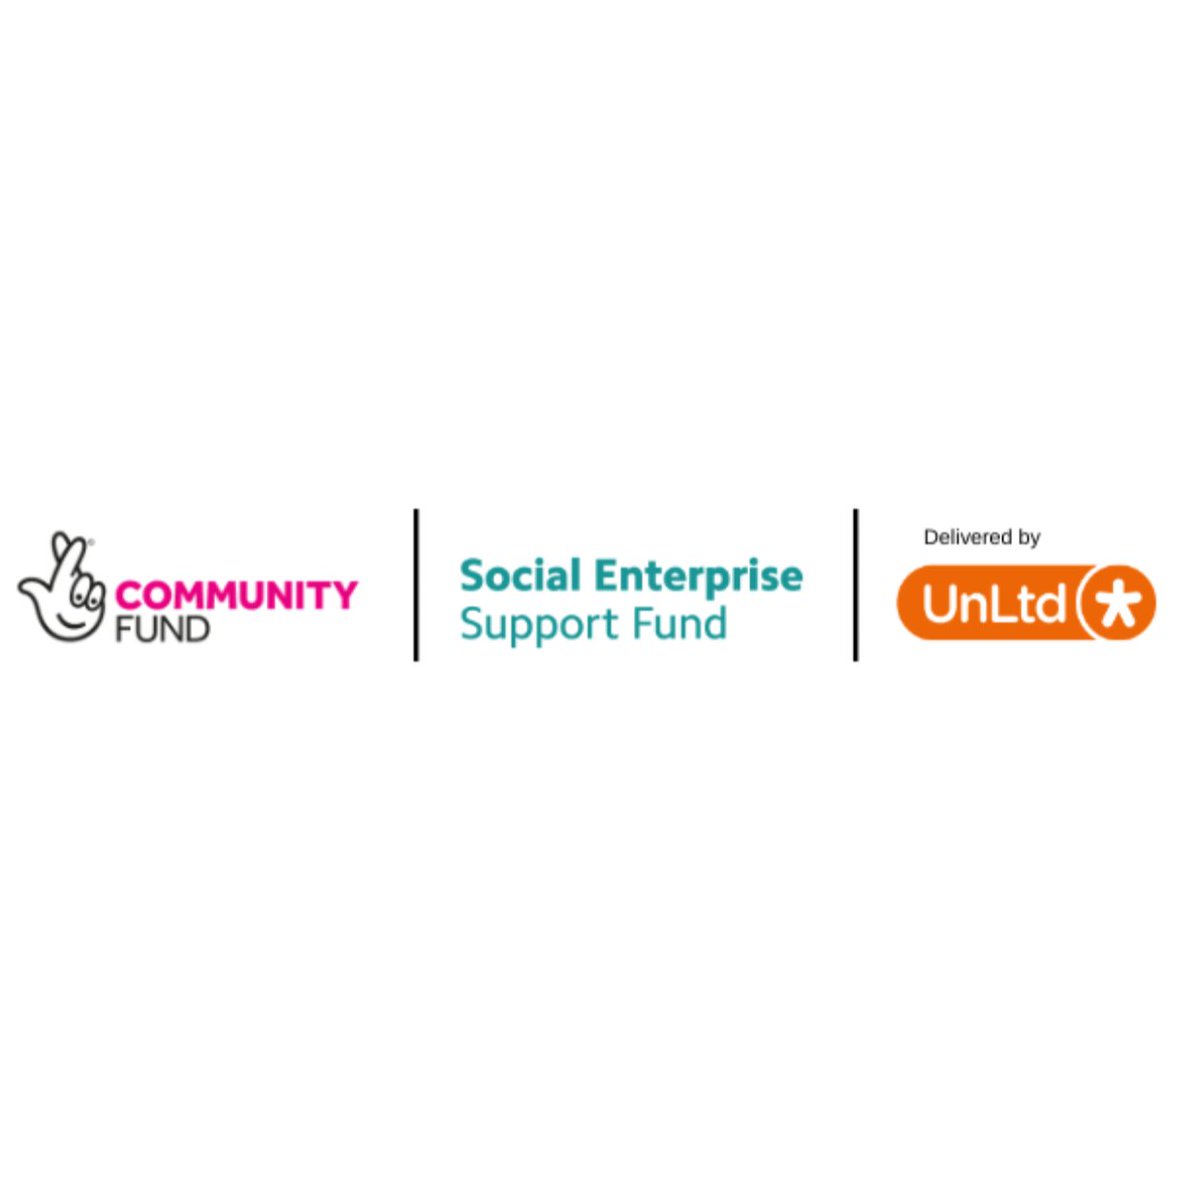 Thrilled to announce we have received support from #SESupportFund to run our 2nd COVID response  #InvestmentReady programme, enabling us to support another group of young #livedexperience social entrepreneurs - huge thanks to @UnLtd, and  @TNLComFund!! #SocialArkFamily 💙